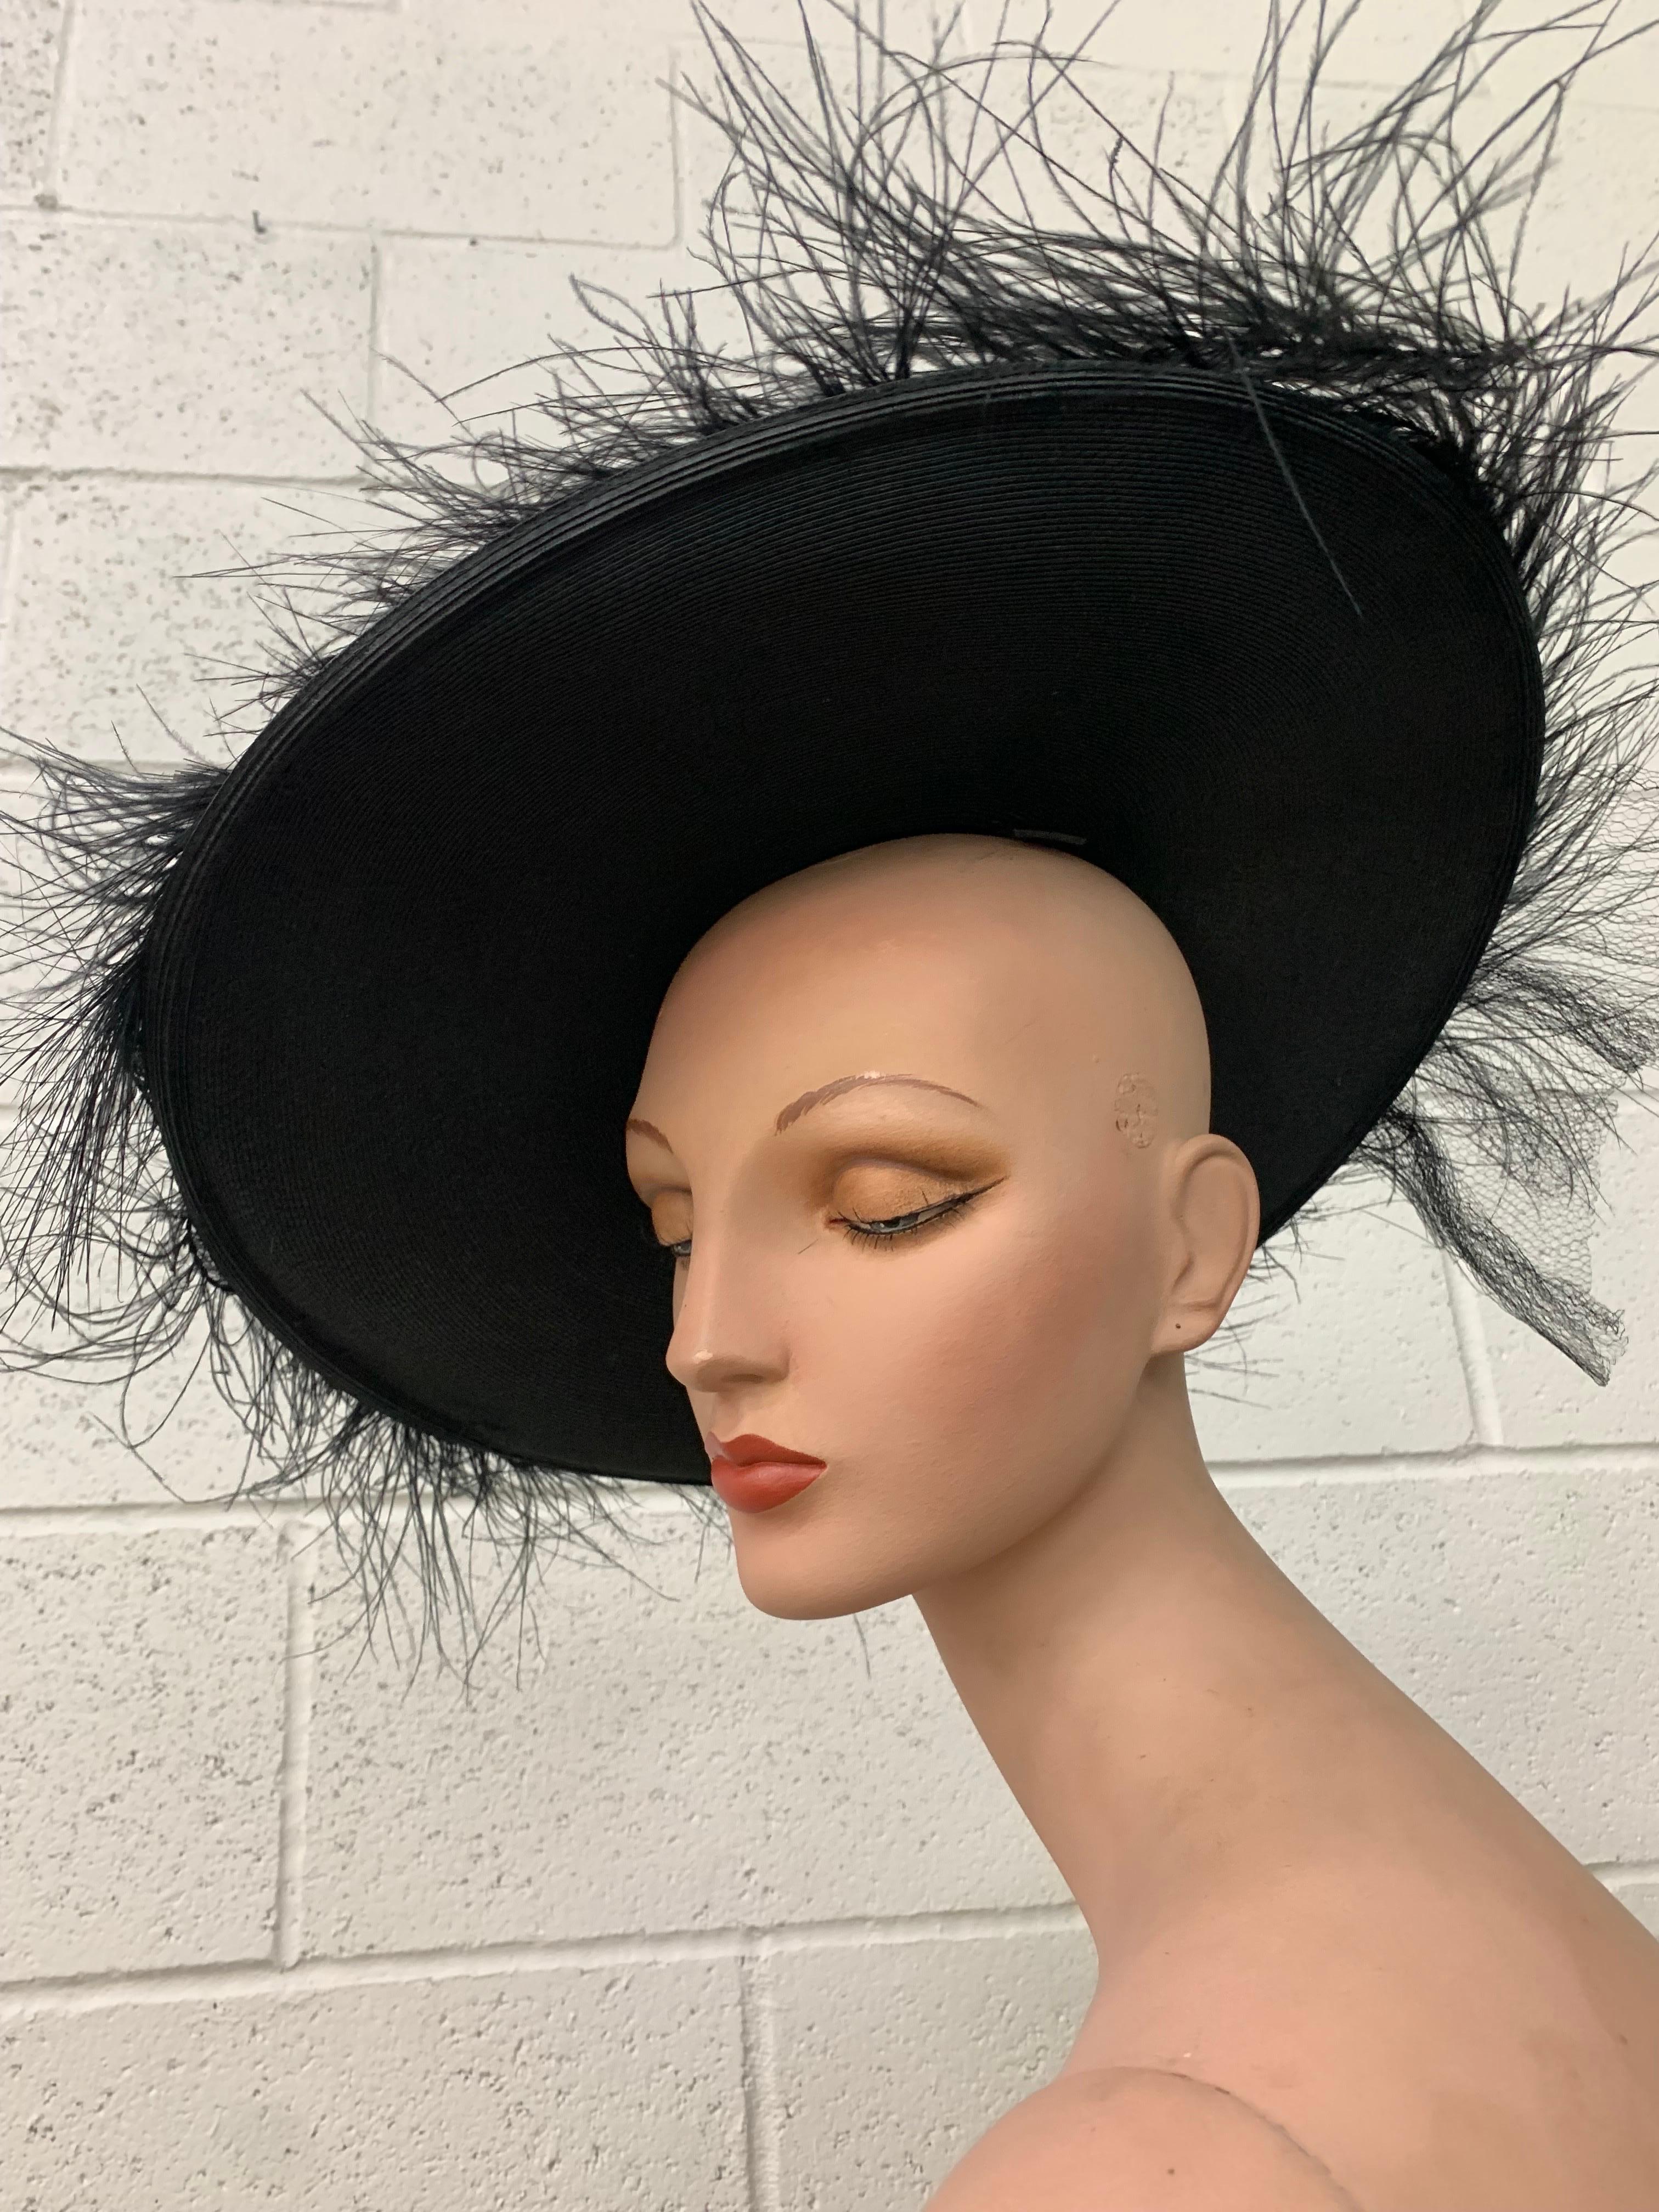 1940s I Magnin Black Fine Straw Cartwheel Hat w Low Crown & Wispy Egret Feather Trim:  Crown of hat is artfully crushed at sewn in that position. Wrapped at crown with black tulle which trails at back. One size fits all-use pins to anchor. Would